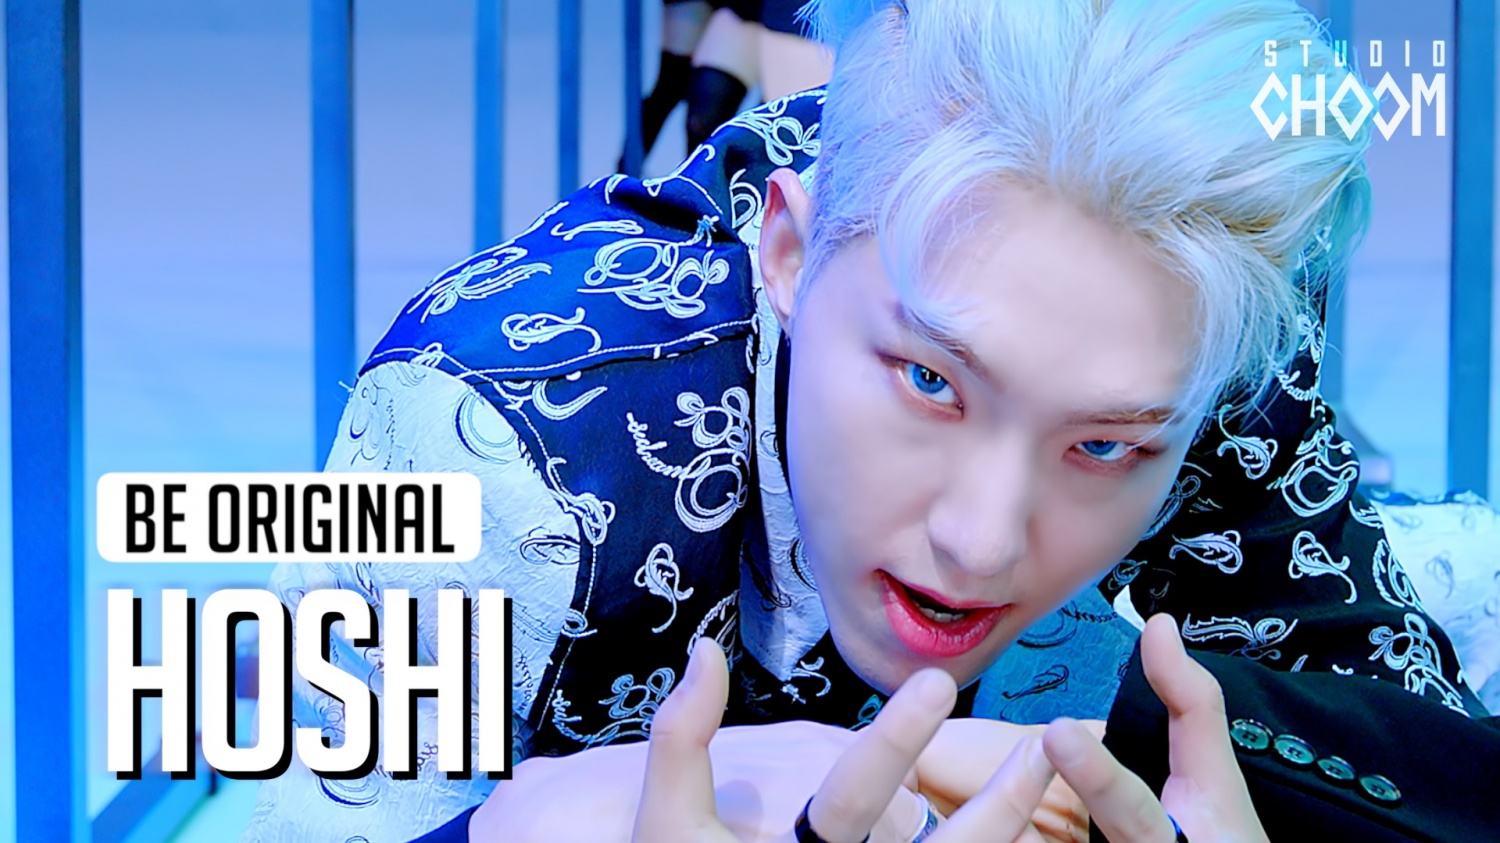 Seventeen Hoshi, “Trendy Performer” from the world's reaction… Global status proven by ‘Spider’